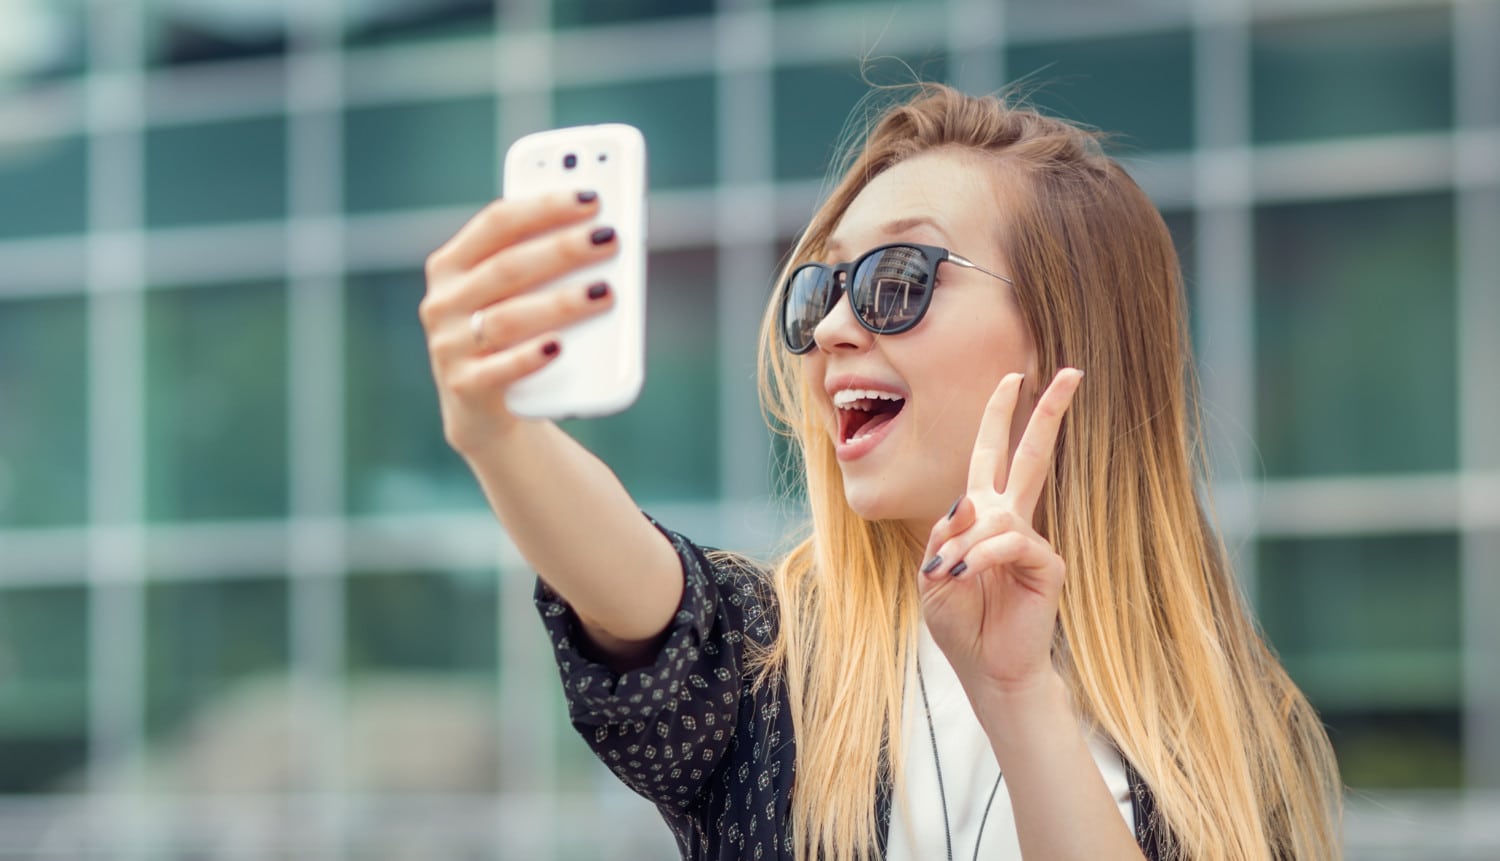 Confirmed: Selfies and social media filters are affecting our ...